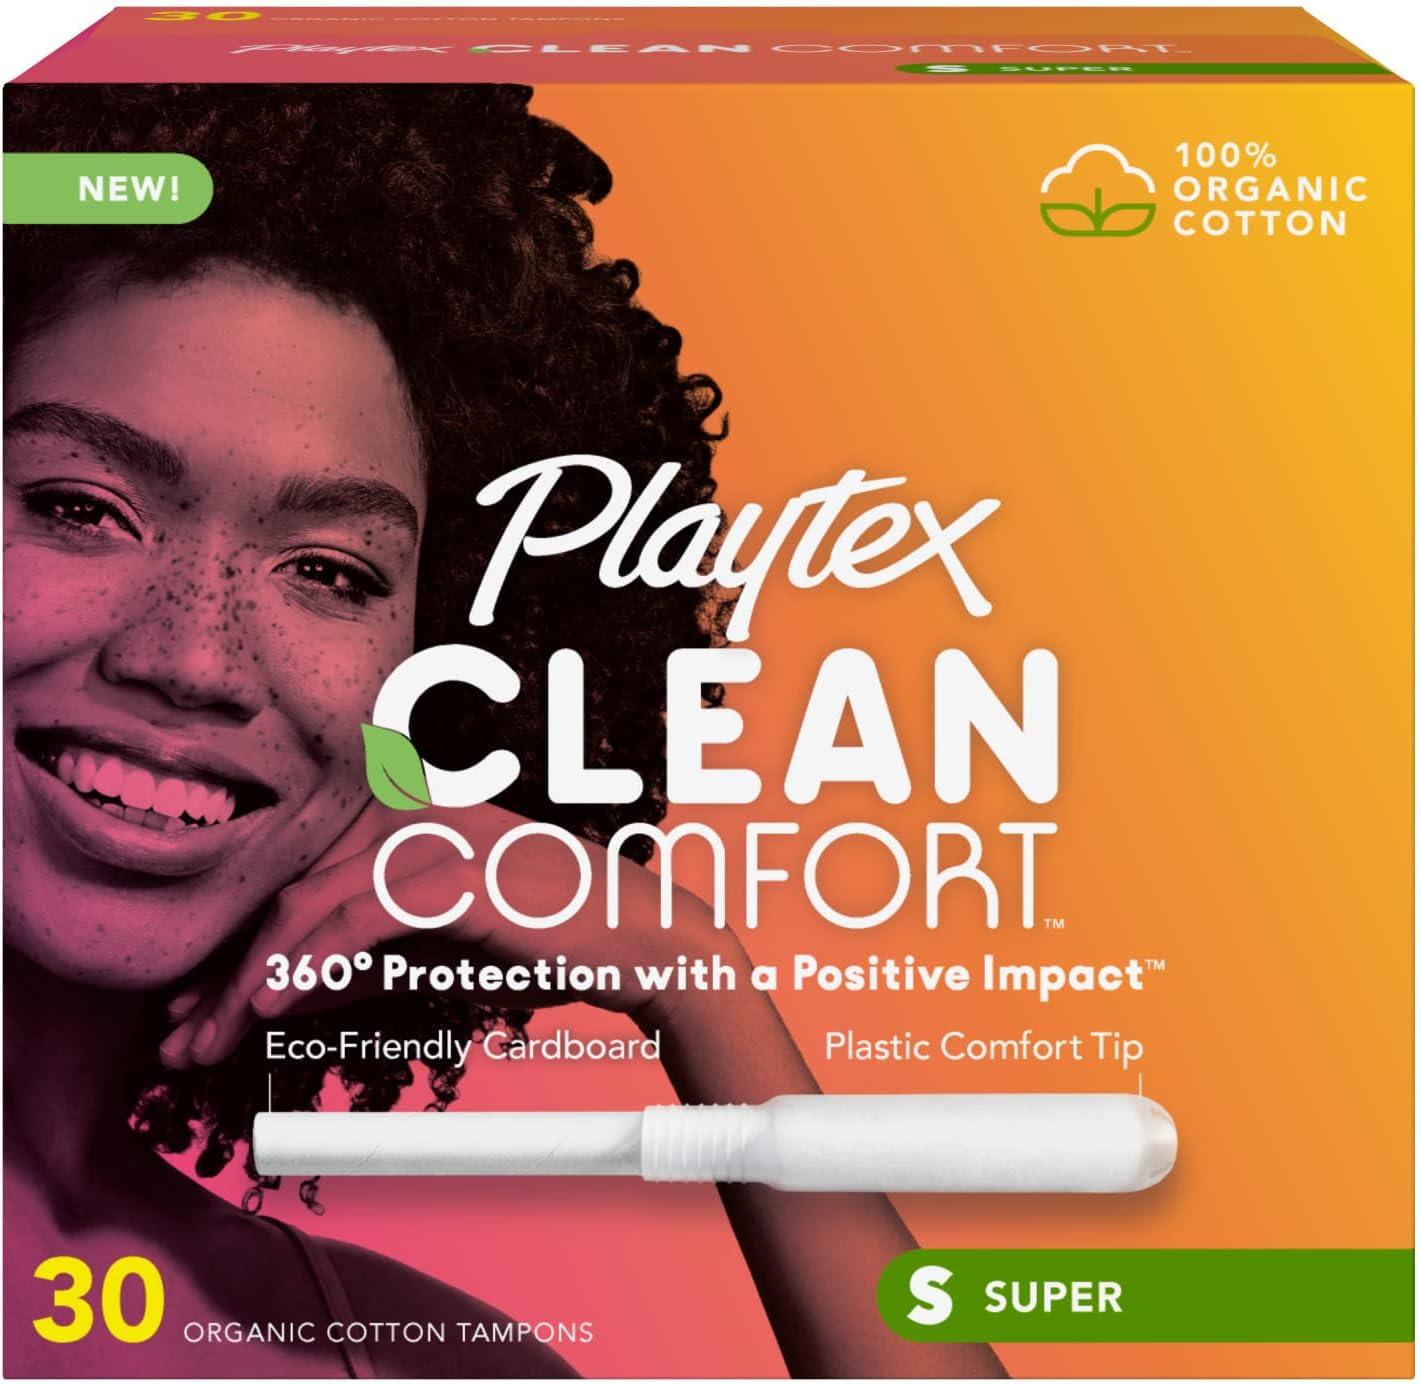 Playtex Clean Comfort Organic Cotton Tampons 30 Pack for $4.39 Shipped